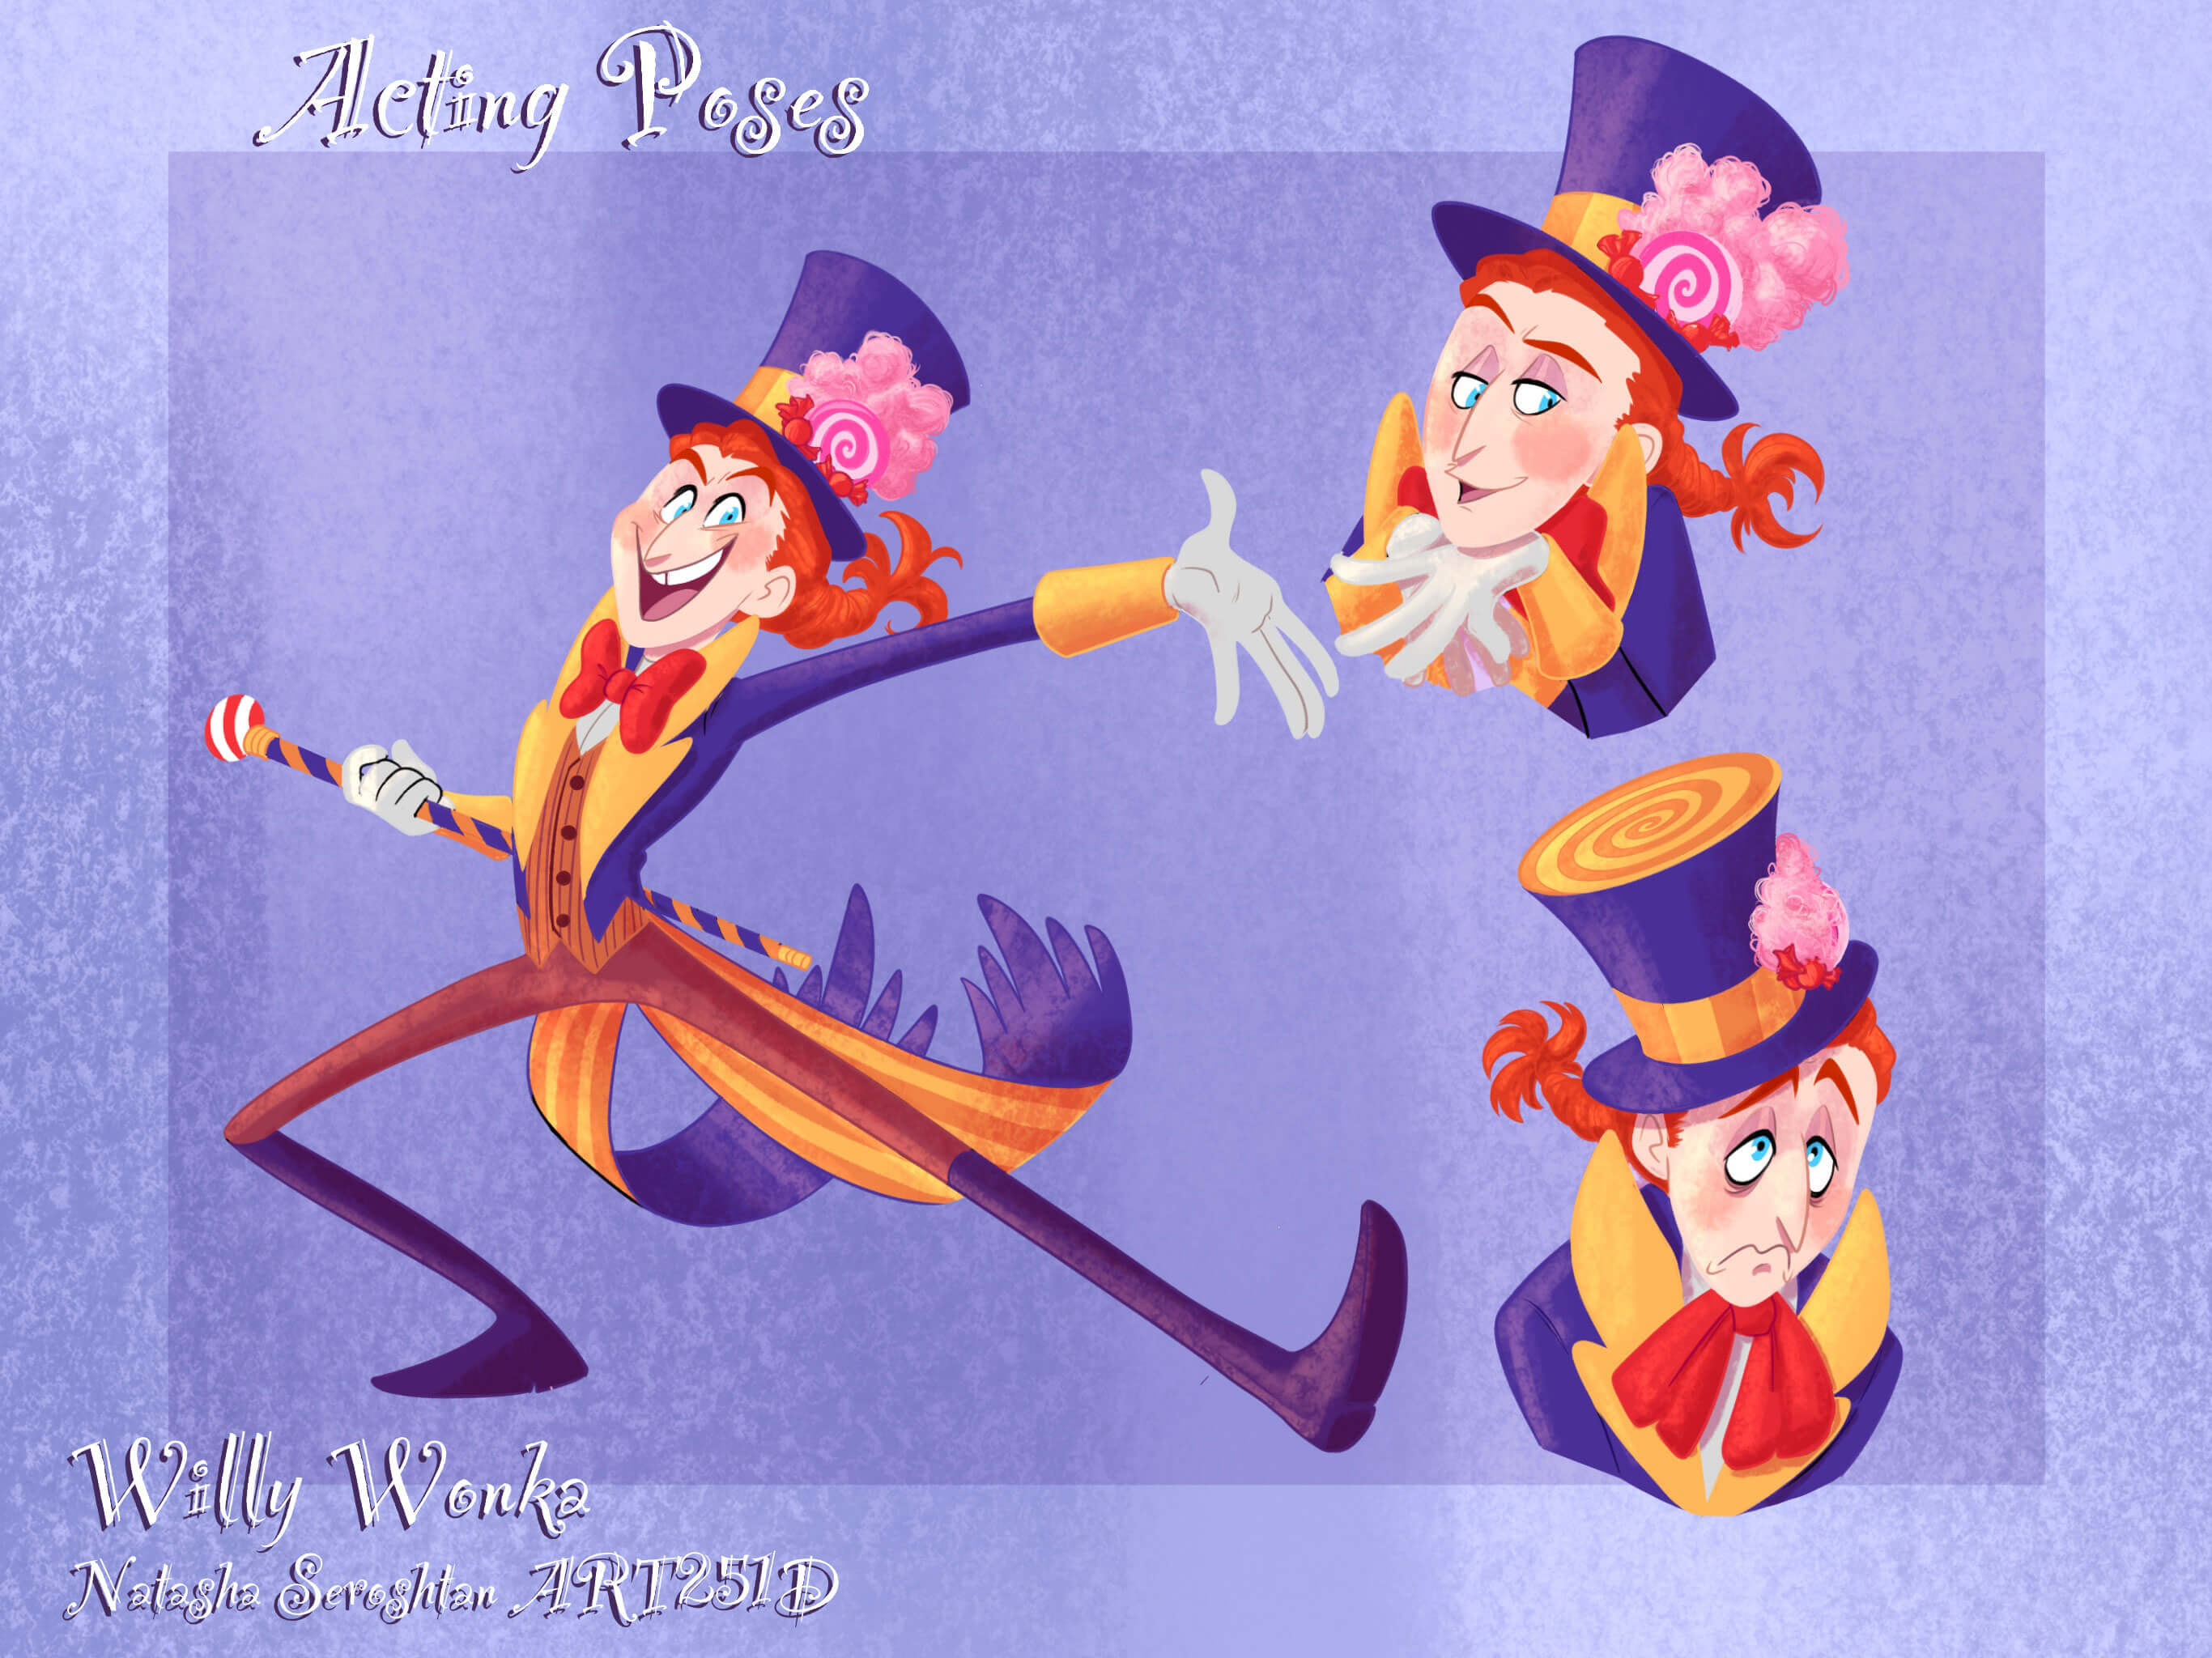 Character art of an alternative version of Willy Wonka.